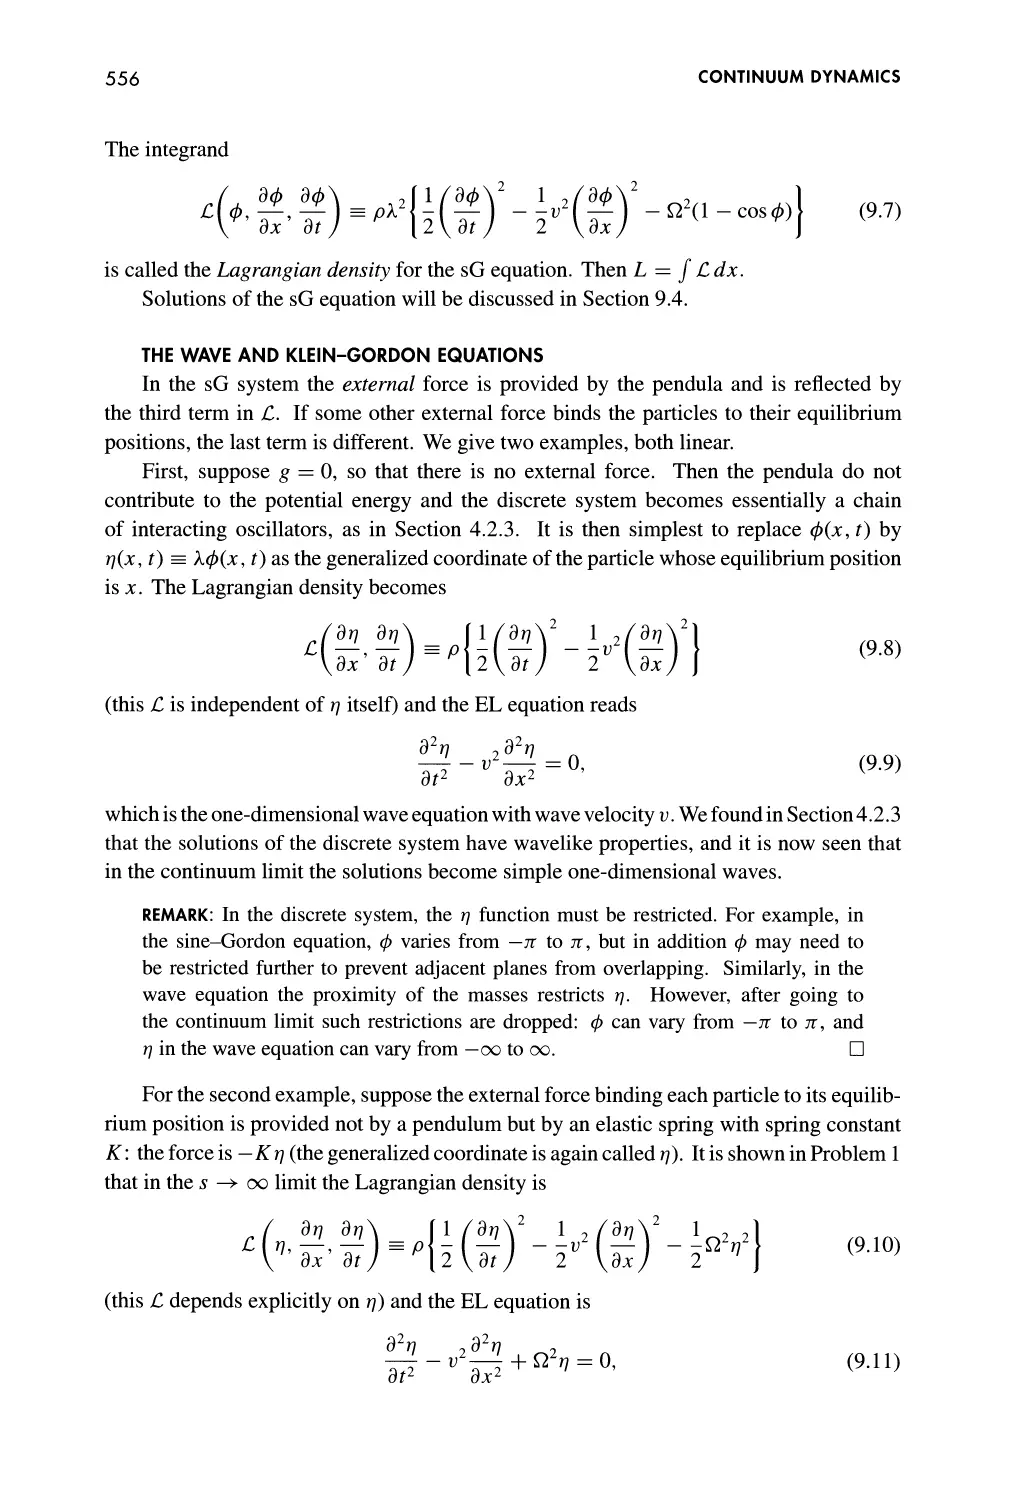 The Wave and Klein-Gordon Equations